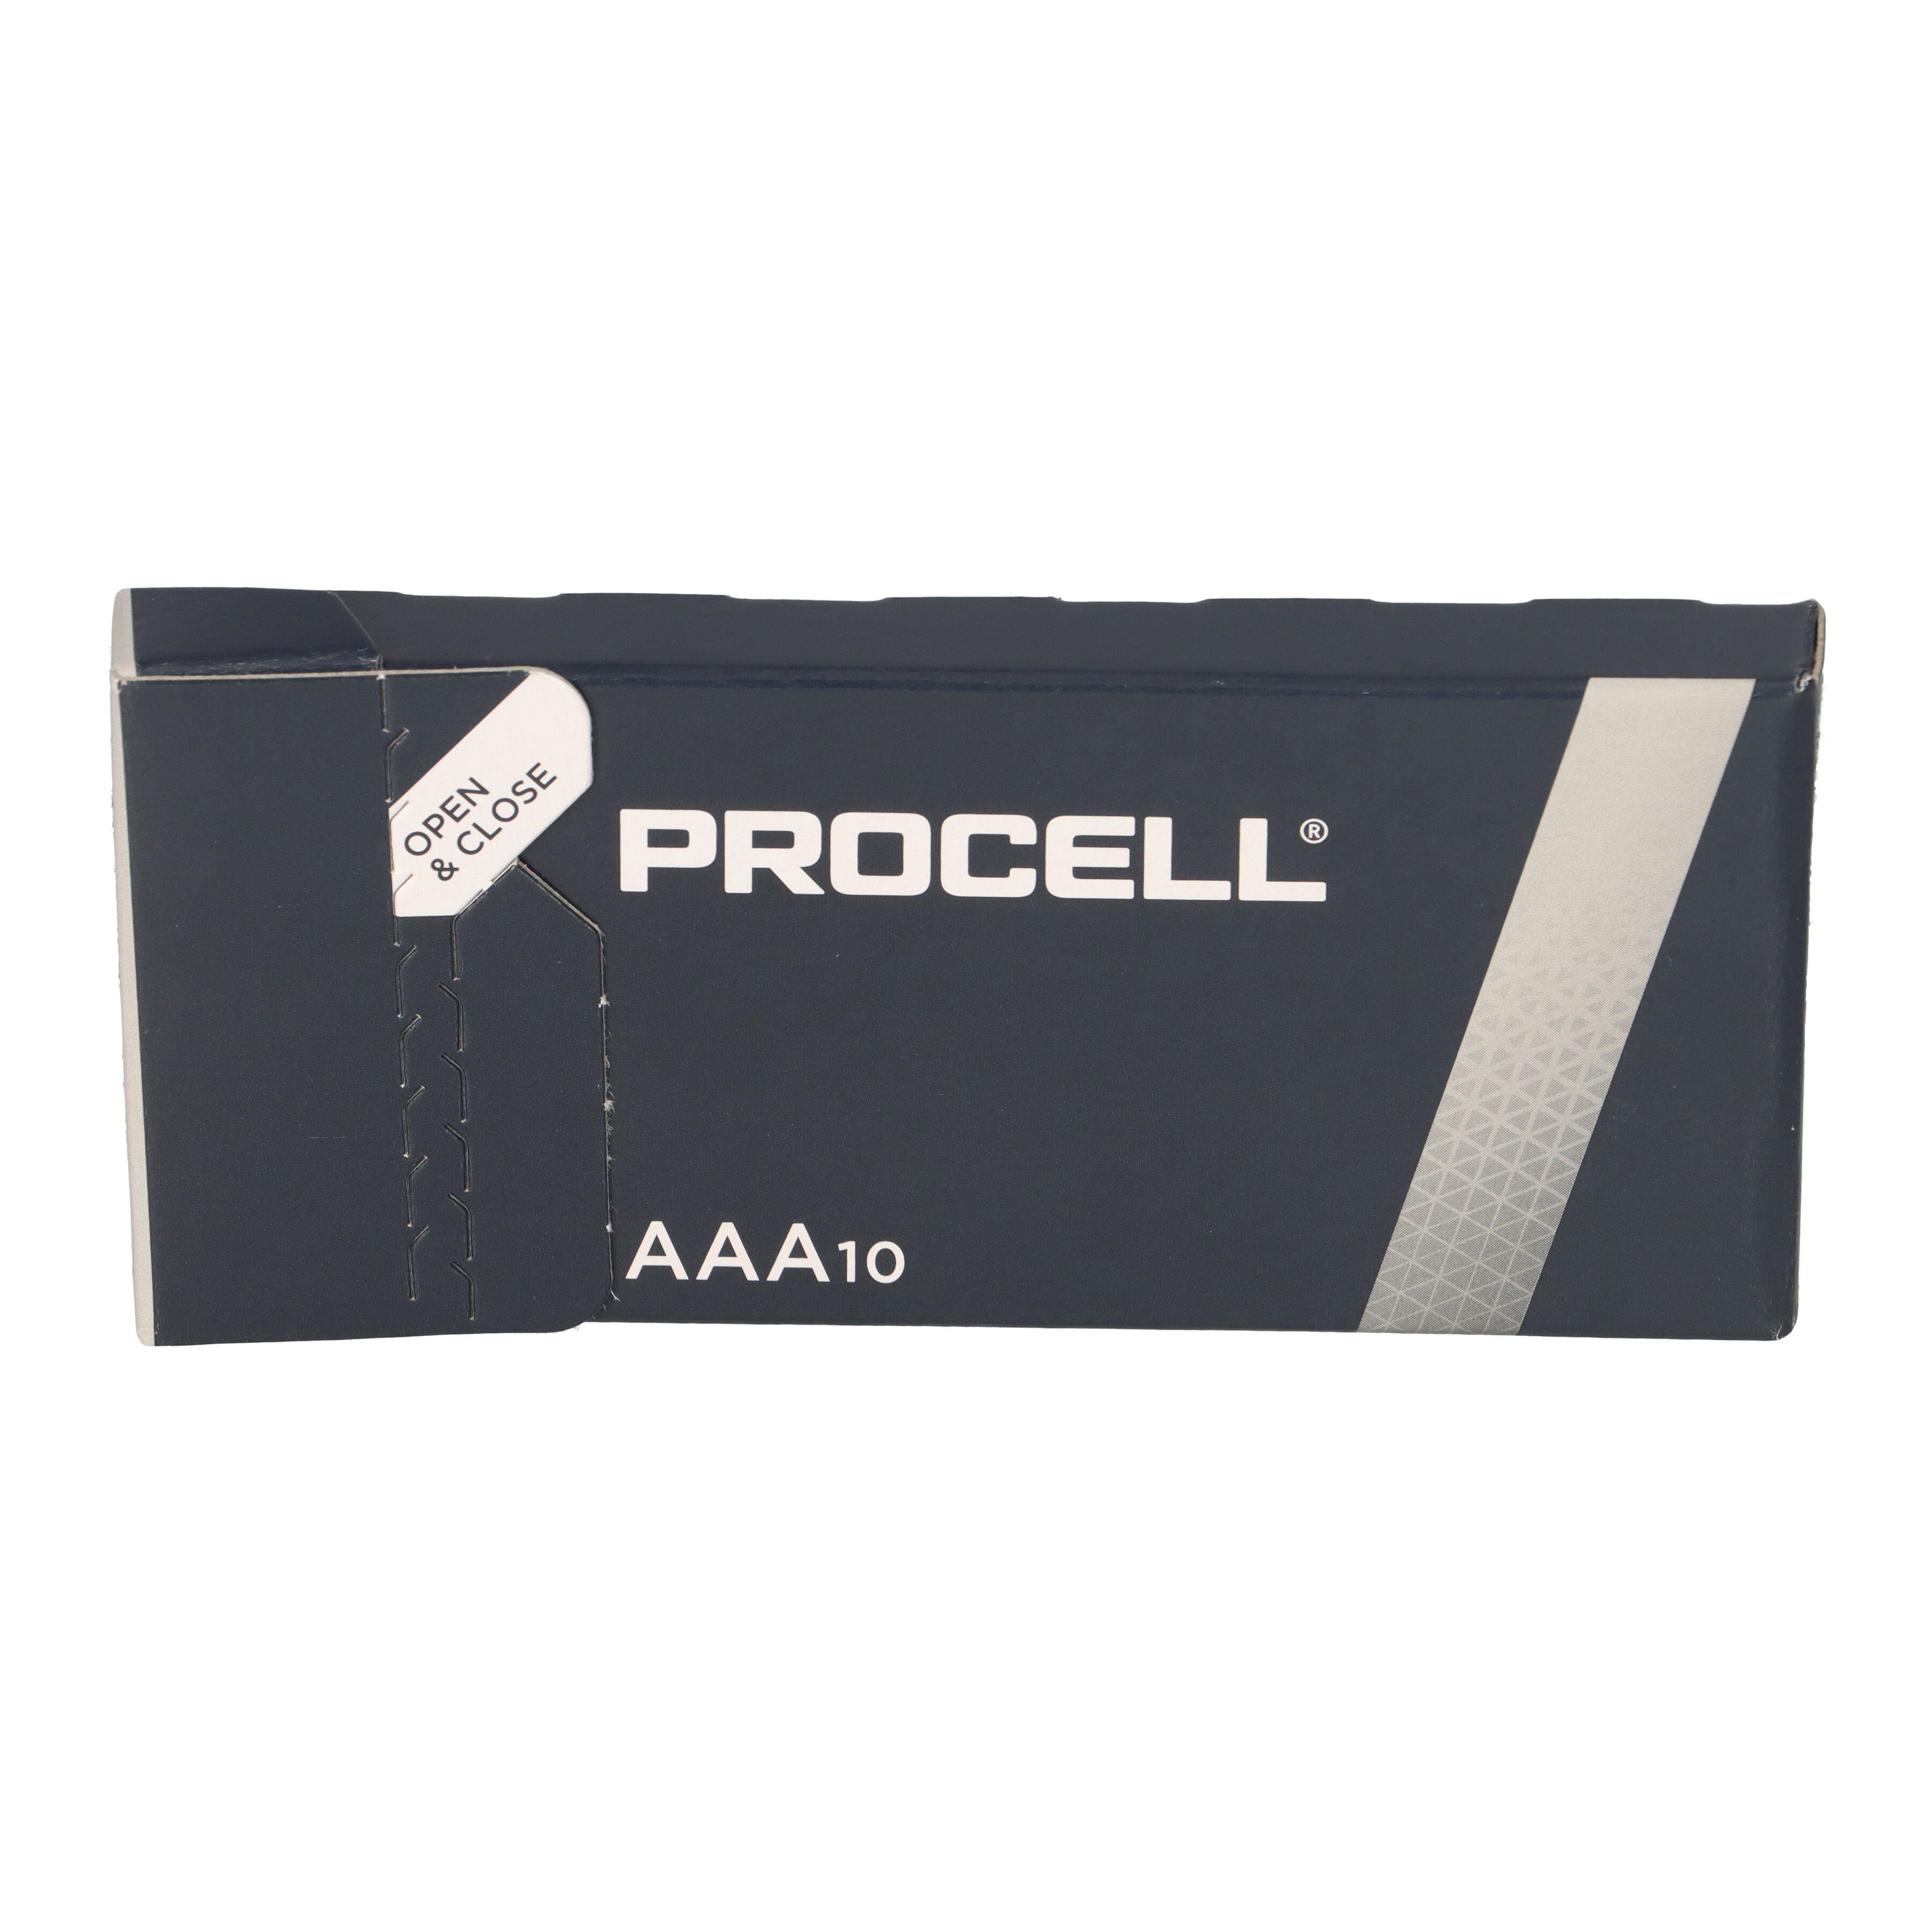 Batterie Duracell MN2400 Micro AAA Procell 10x Batterie Duracell